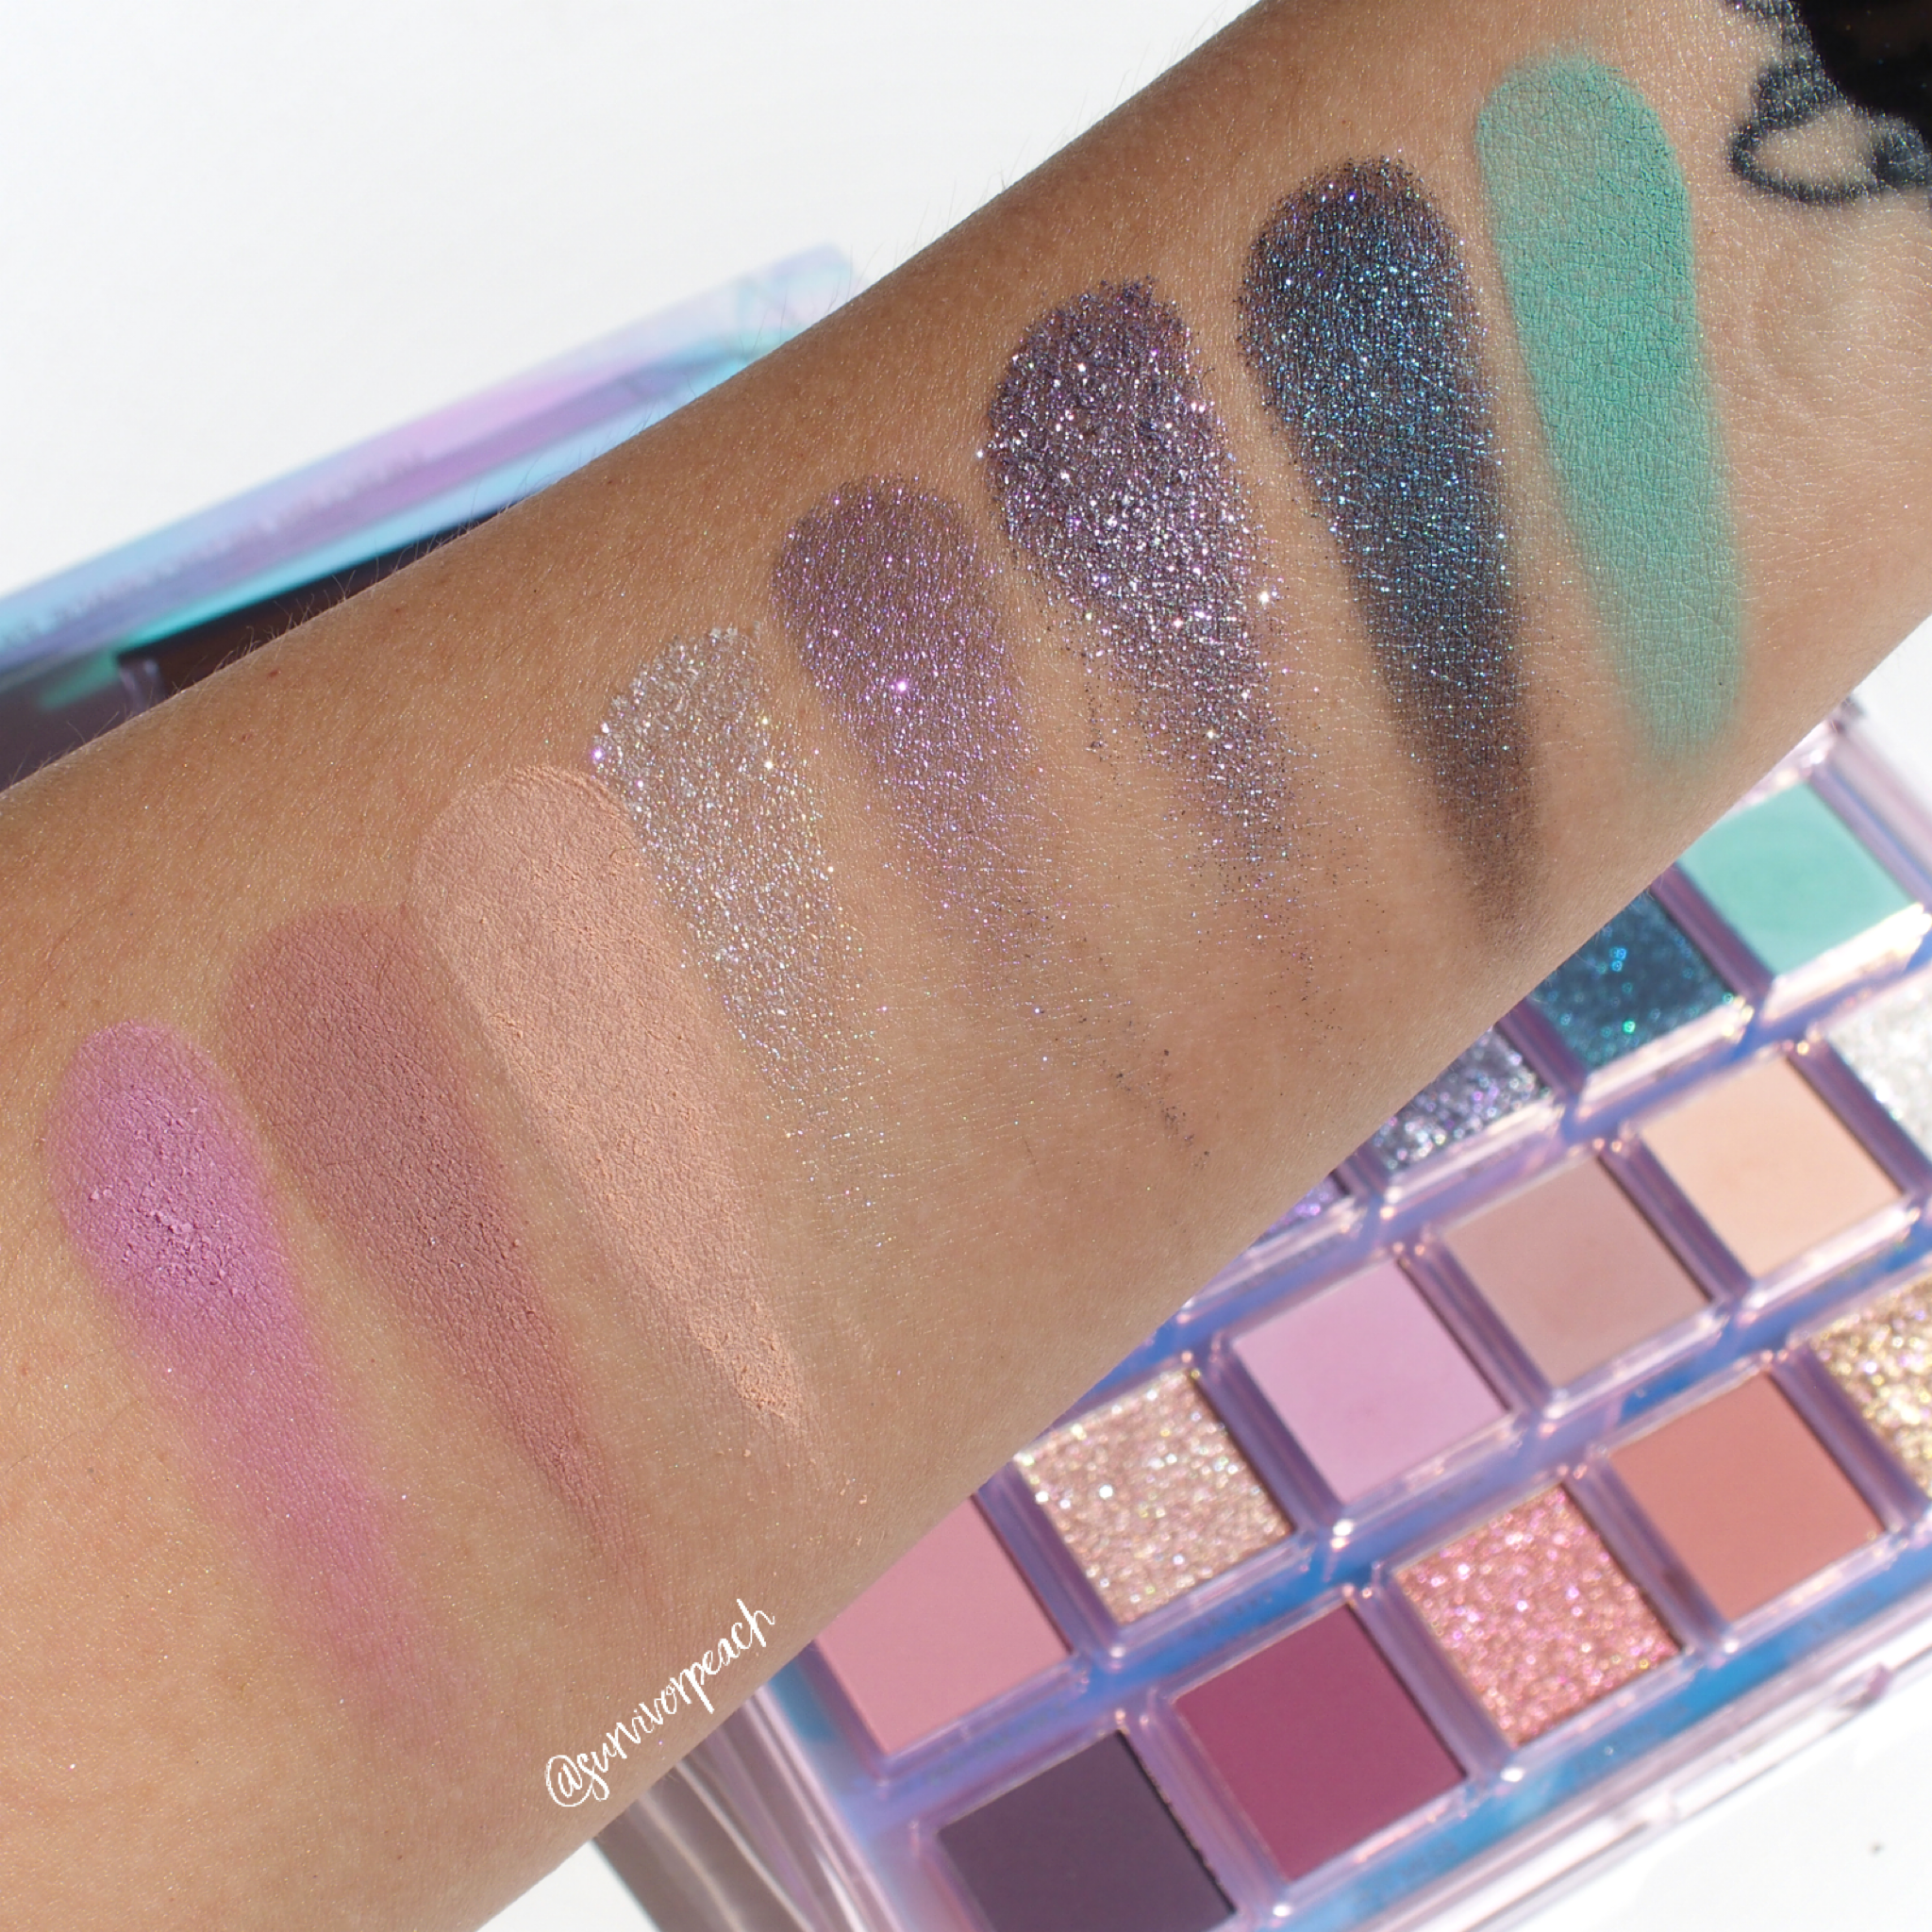 Huda Beauty Mercury Retrograde Eyeshadow Palette Review And Swatches.